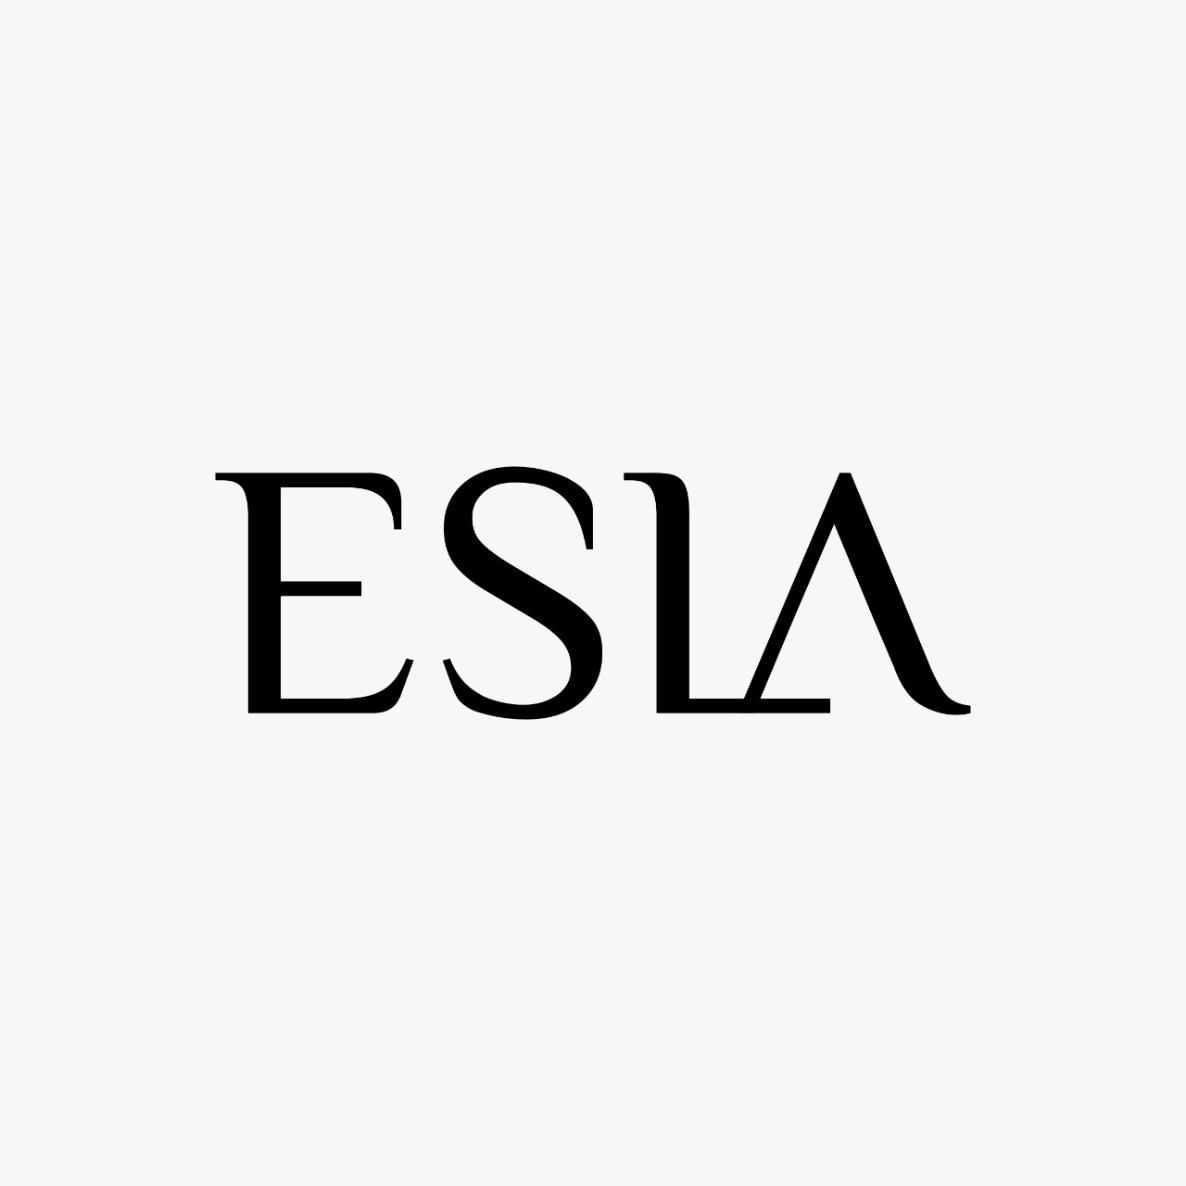 Up To 12 Months with 0% Interest / Esla